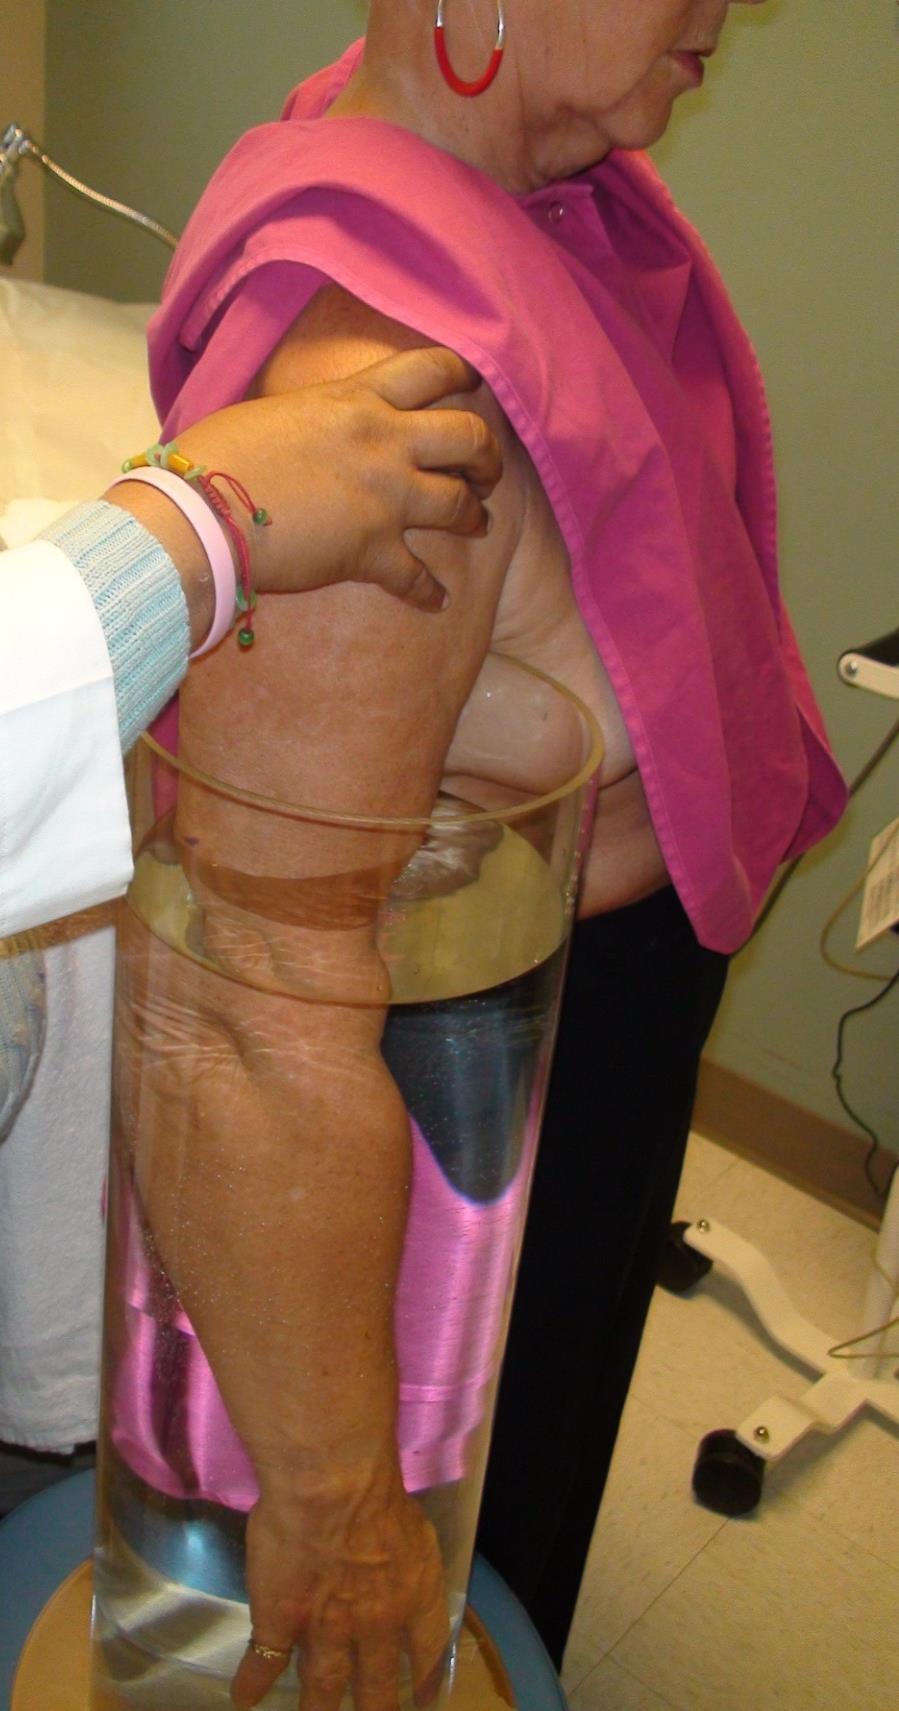 Lymphedema Evaluation Water volume displacement: Volumeter filled with water 10 cm Above the Elbow